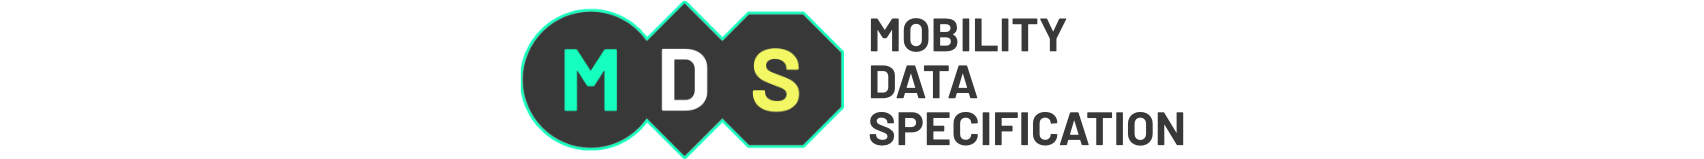 MDS Mobility Data Specification Logo Github